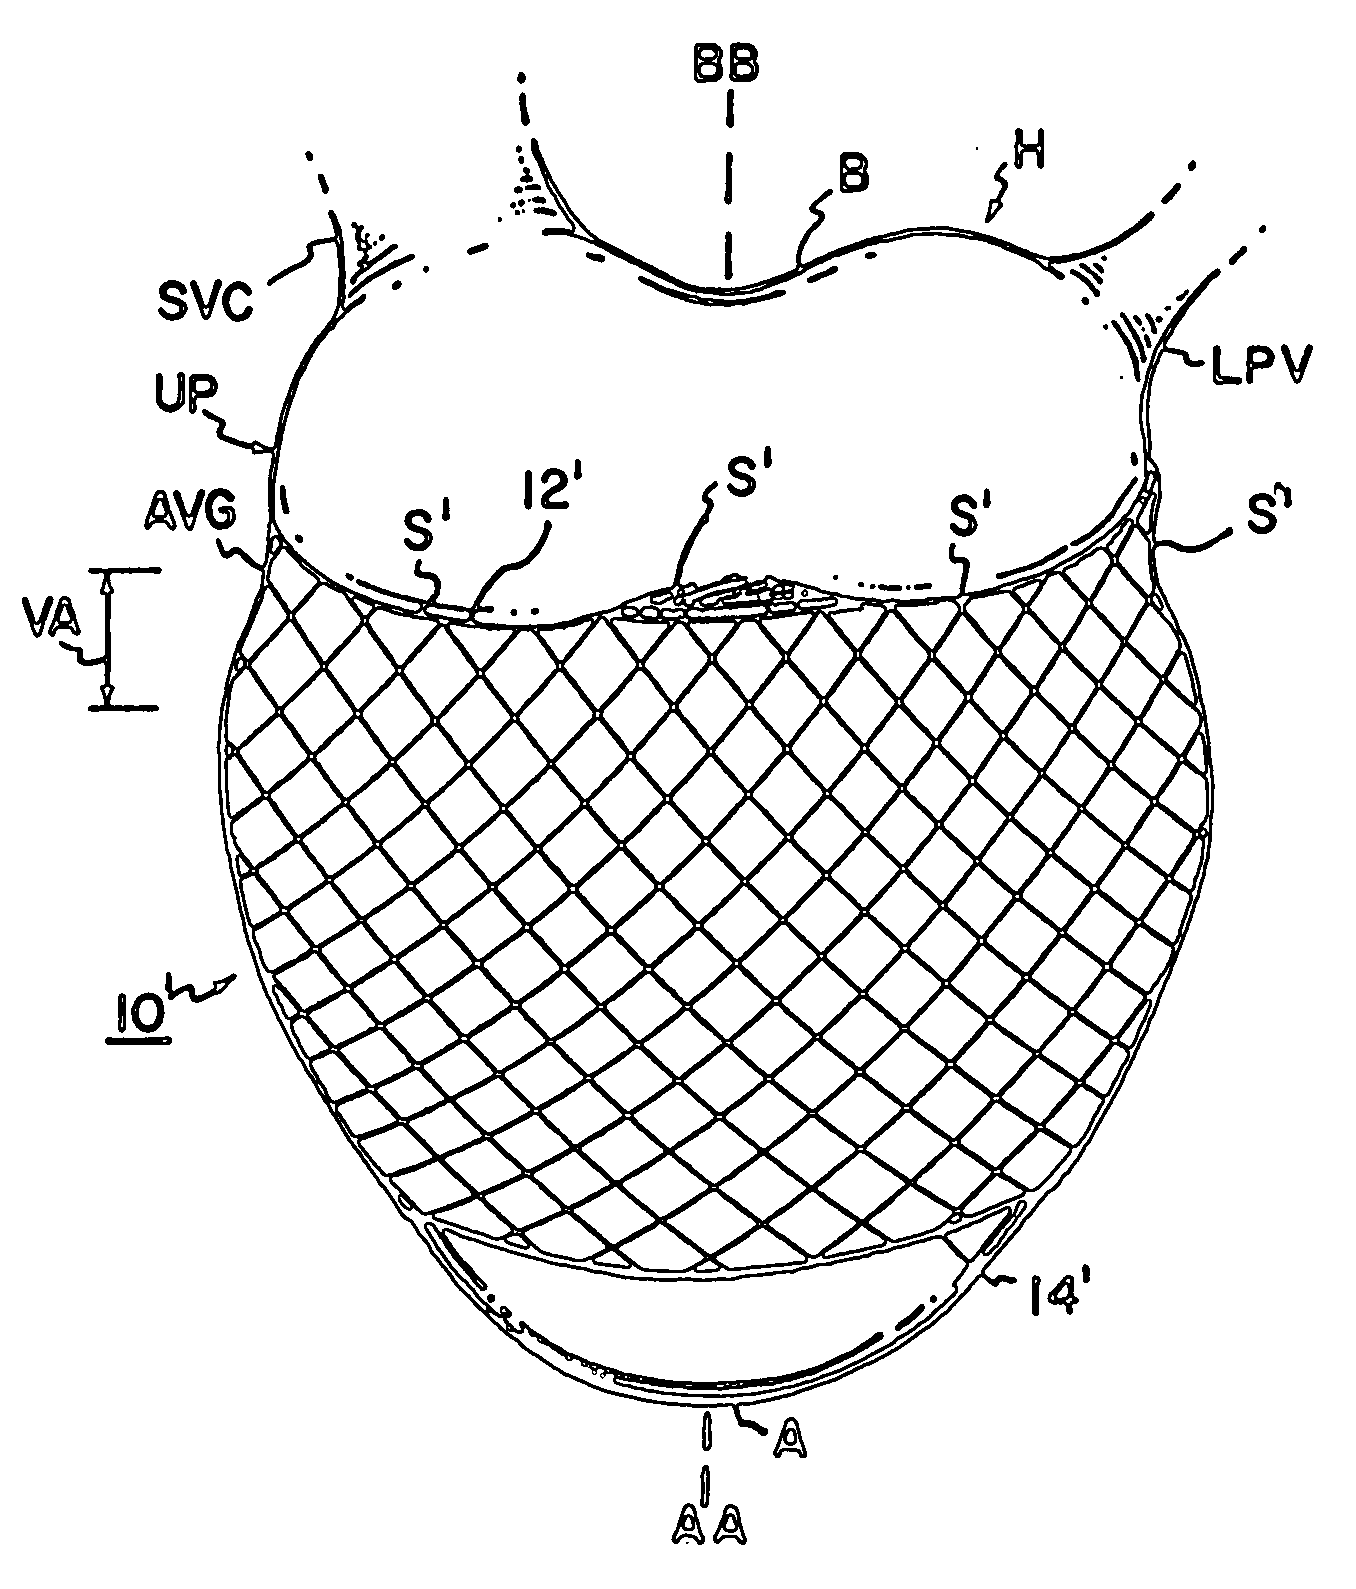 Compliant cardiac support device